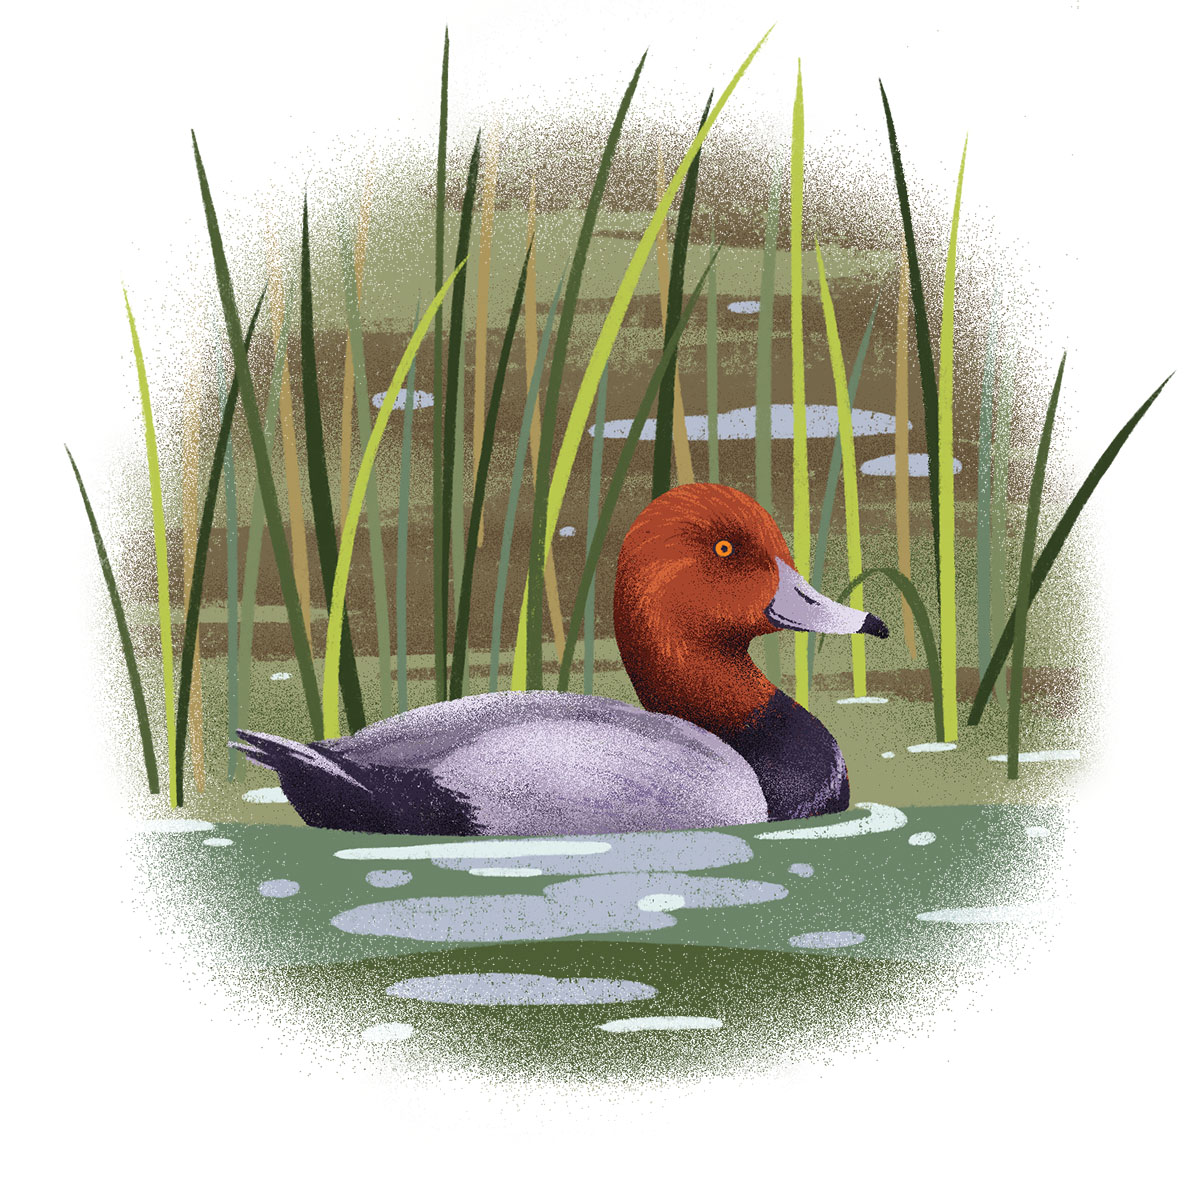 An illustration of a swimming duck with a bright red head moving through tall grassy reeds